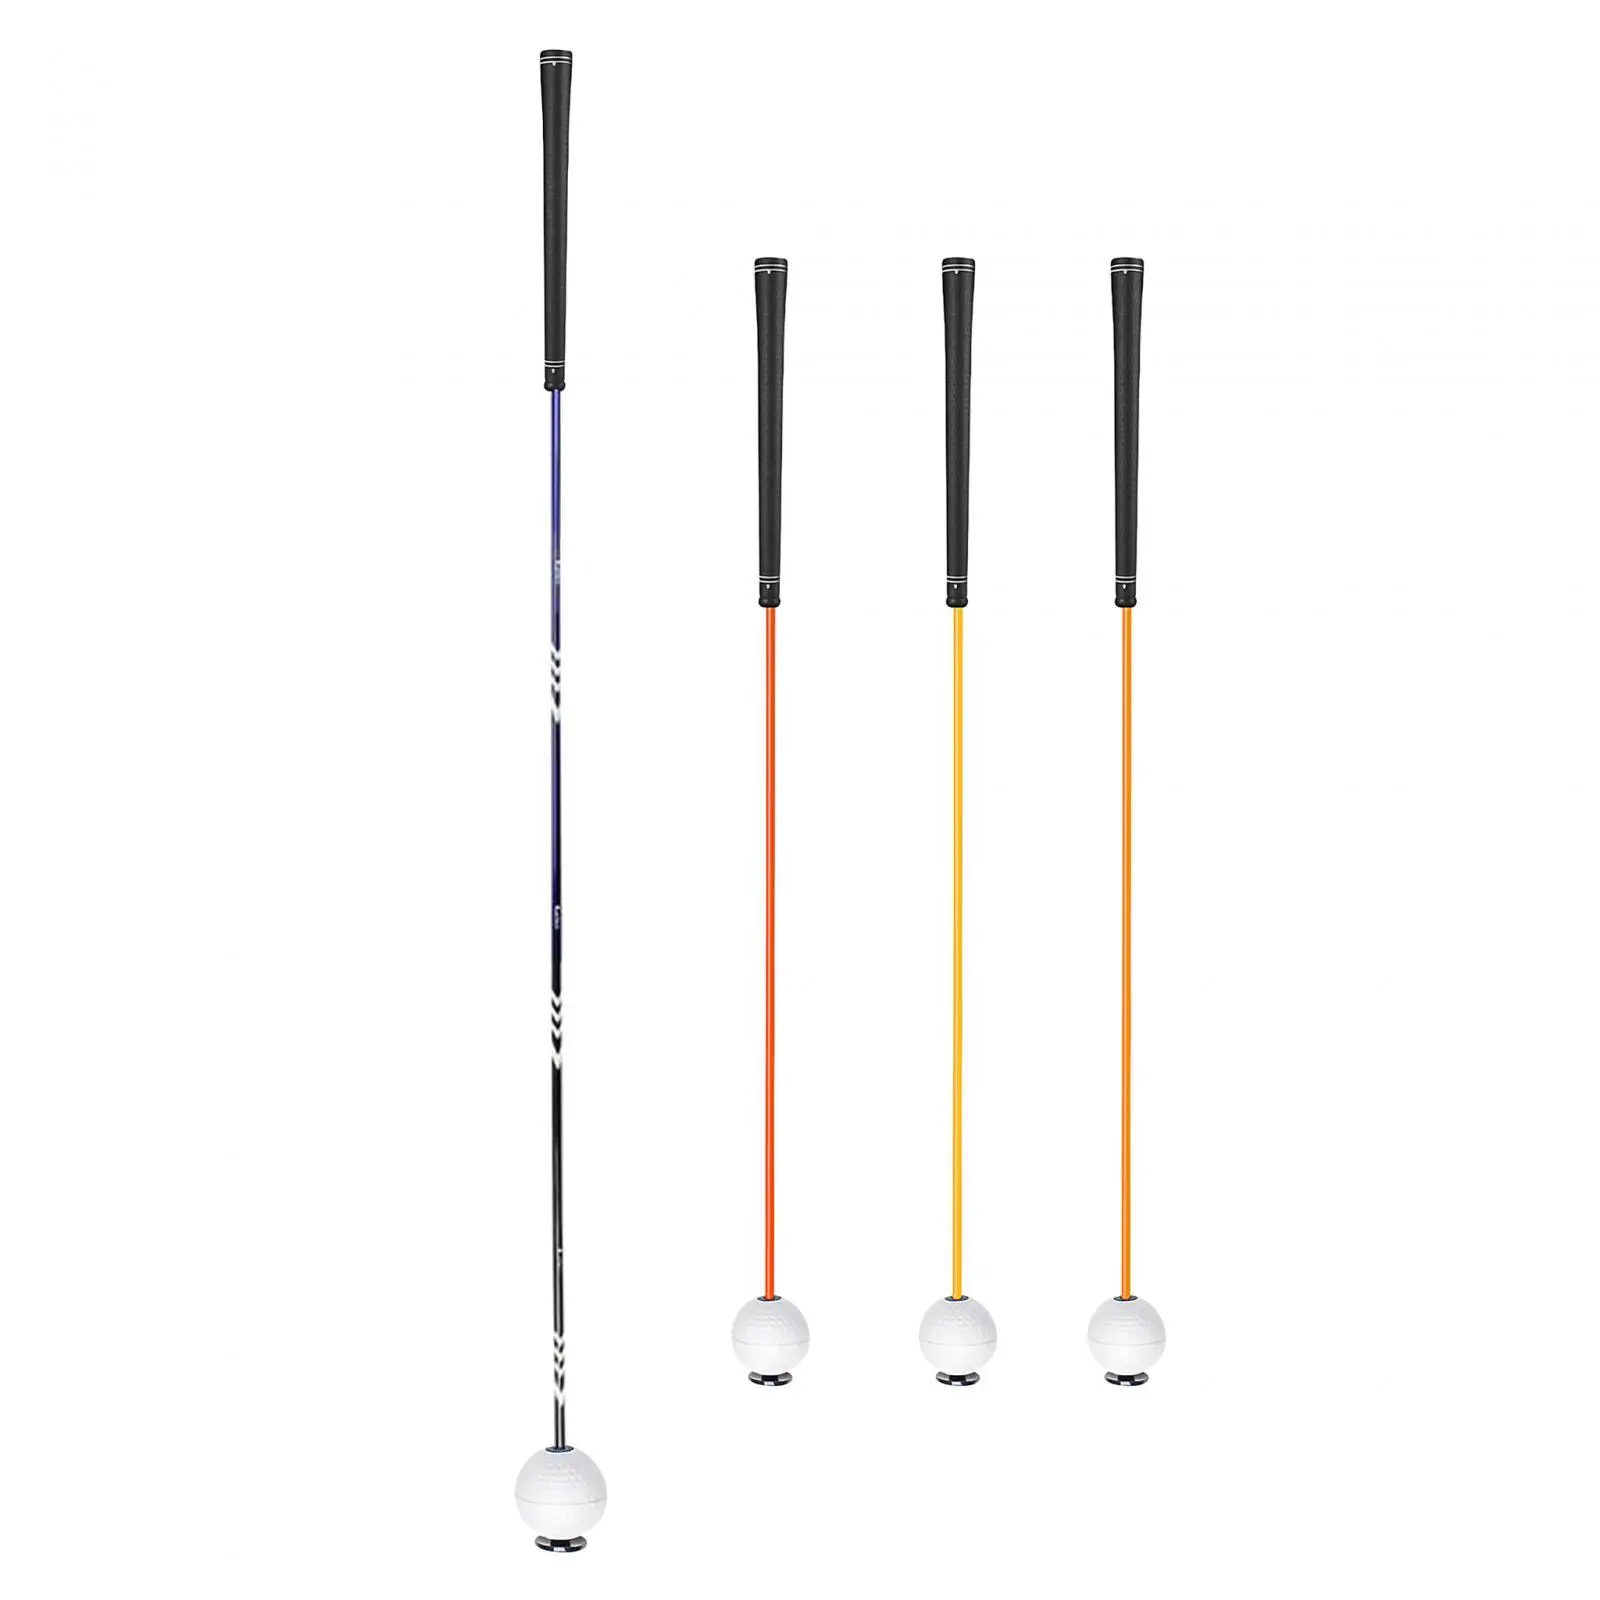 Golf Swing Trainer Comfortable Grip for Beginners Golf Practice Sticks for Flexibility Speed Balance Tempo Position Correction